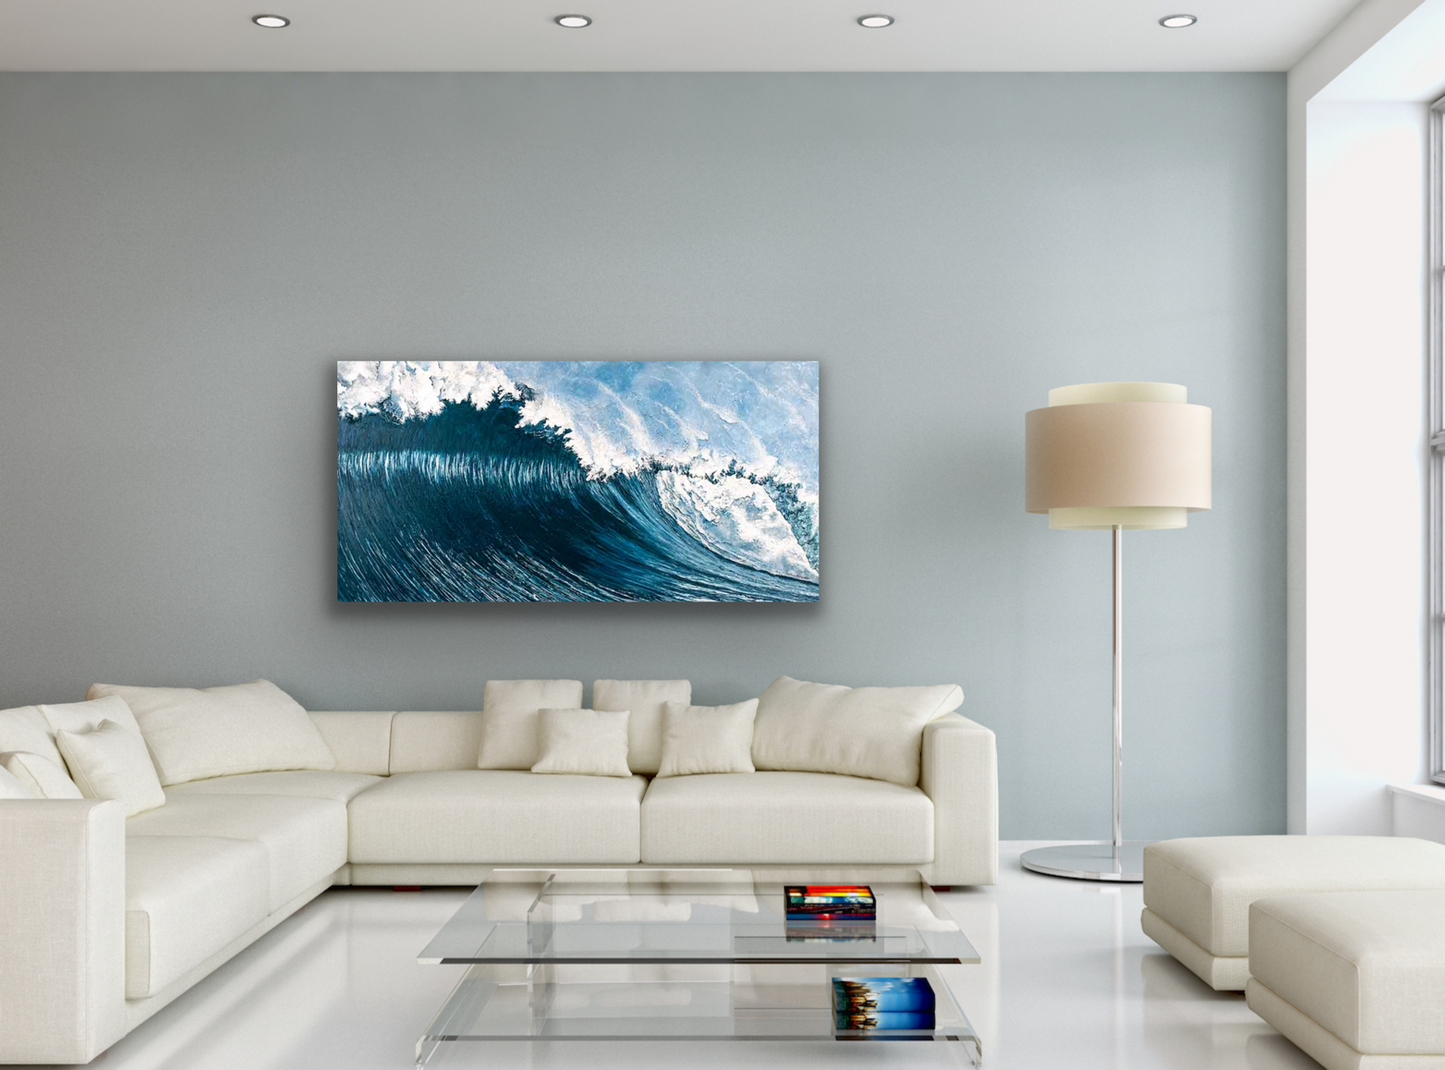 "Force" wild wave art of work will make a stunning impact on your feature wall in your living room , dining room or bed room.